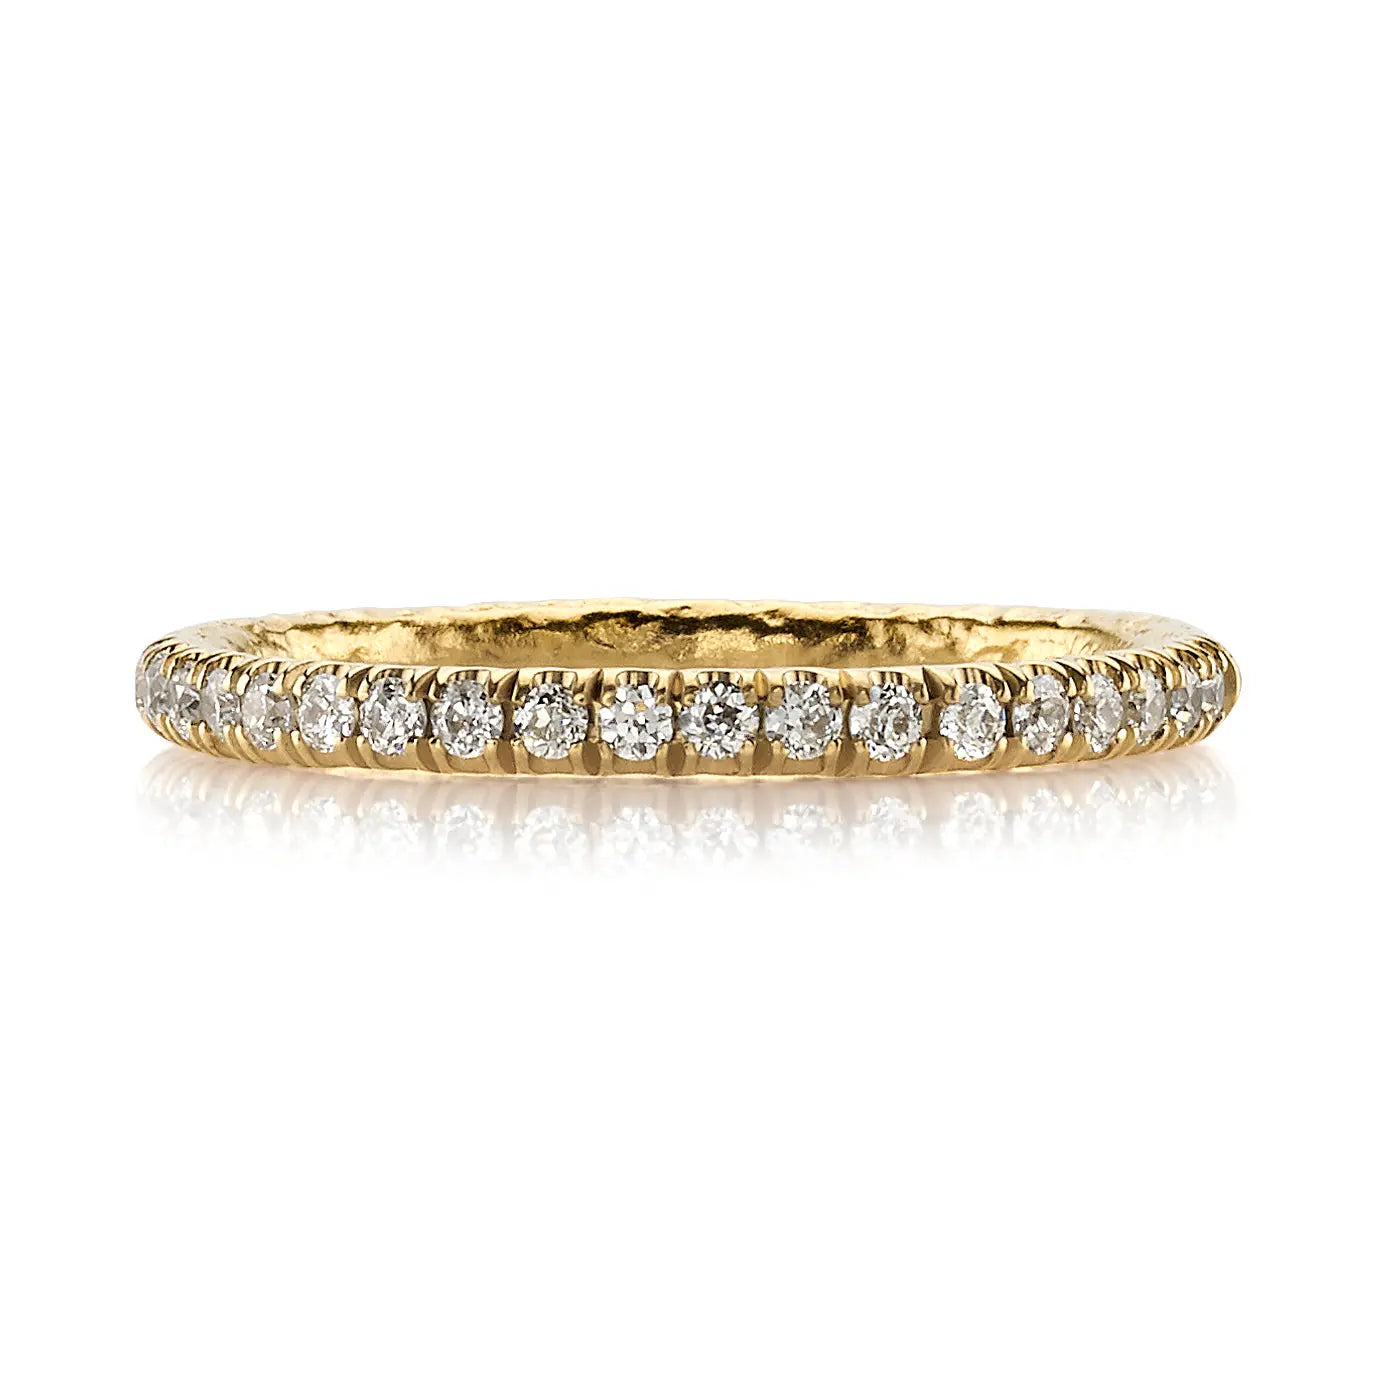 18k Yellow Gold with Approximately 0.24ctw G-H/VS old European cut diamonds pave set in a handcrafted hammered 22K yellow gold half eternity band.   Size: 6.5  If you need a different size, please email shop@sbvail.com. If an item is out of stock, please allow 6-8 weeks for delivery.  Designed by Single Stone and made in LA